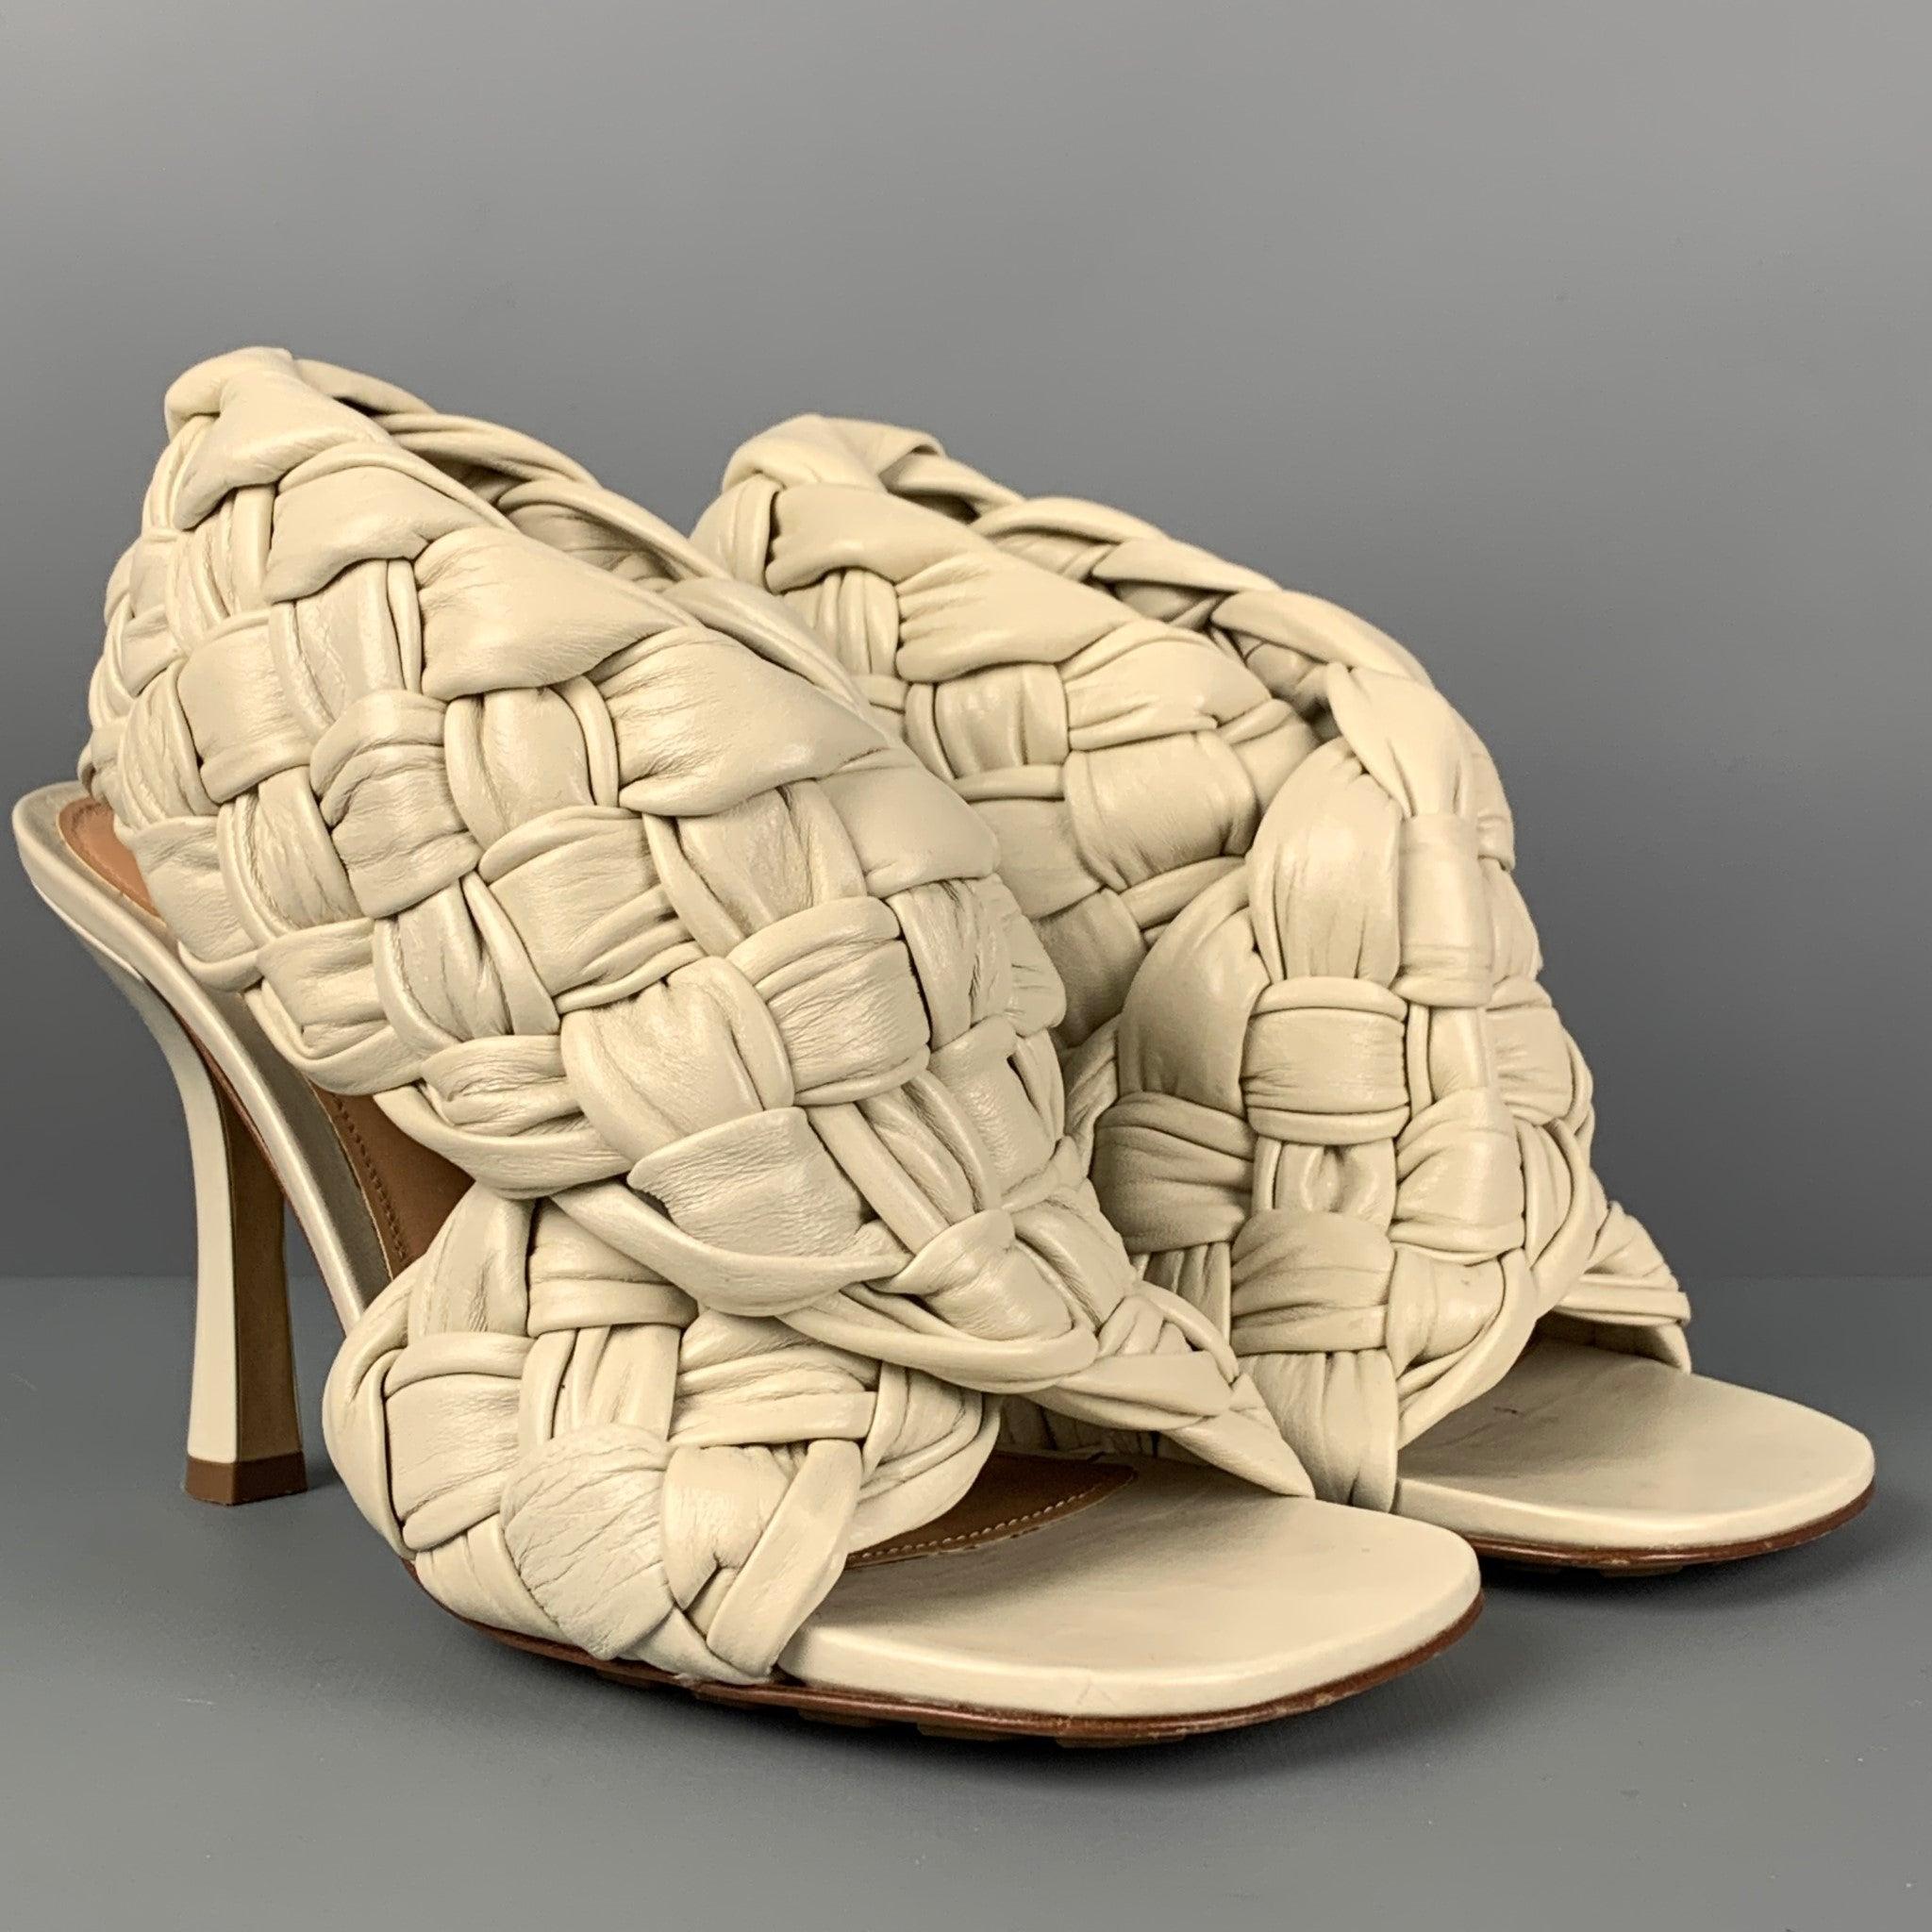 BOTTEGA VENETA sandals comes in a off-white intrecciato woven leather featuring a open square toe, knotted detail at vamp, covered stiletto heel, and a rubber sole. Made in Italy.
Very Good
Pre-Owned Condition. Light wear and a mark at heel. As-Is. 